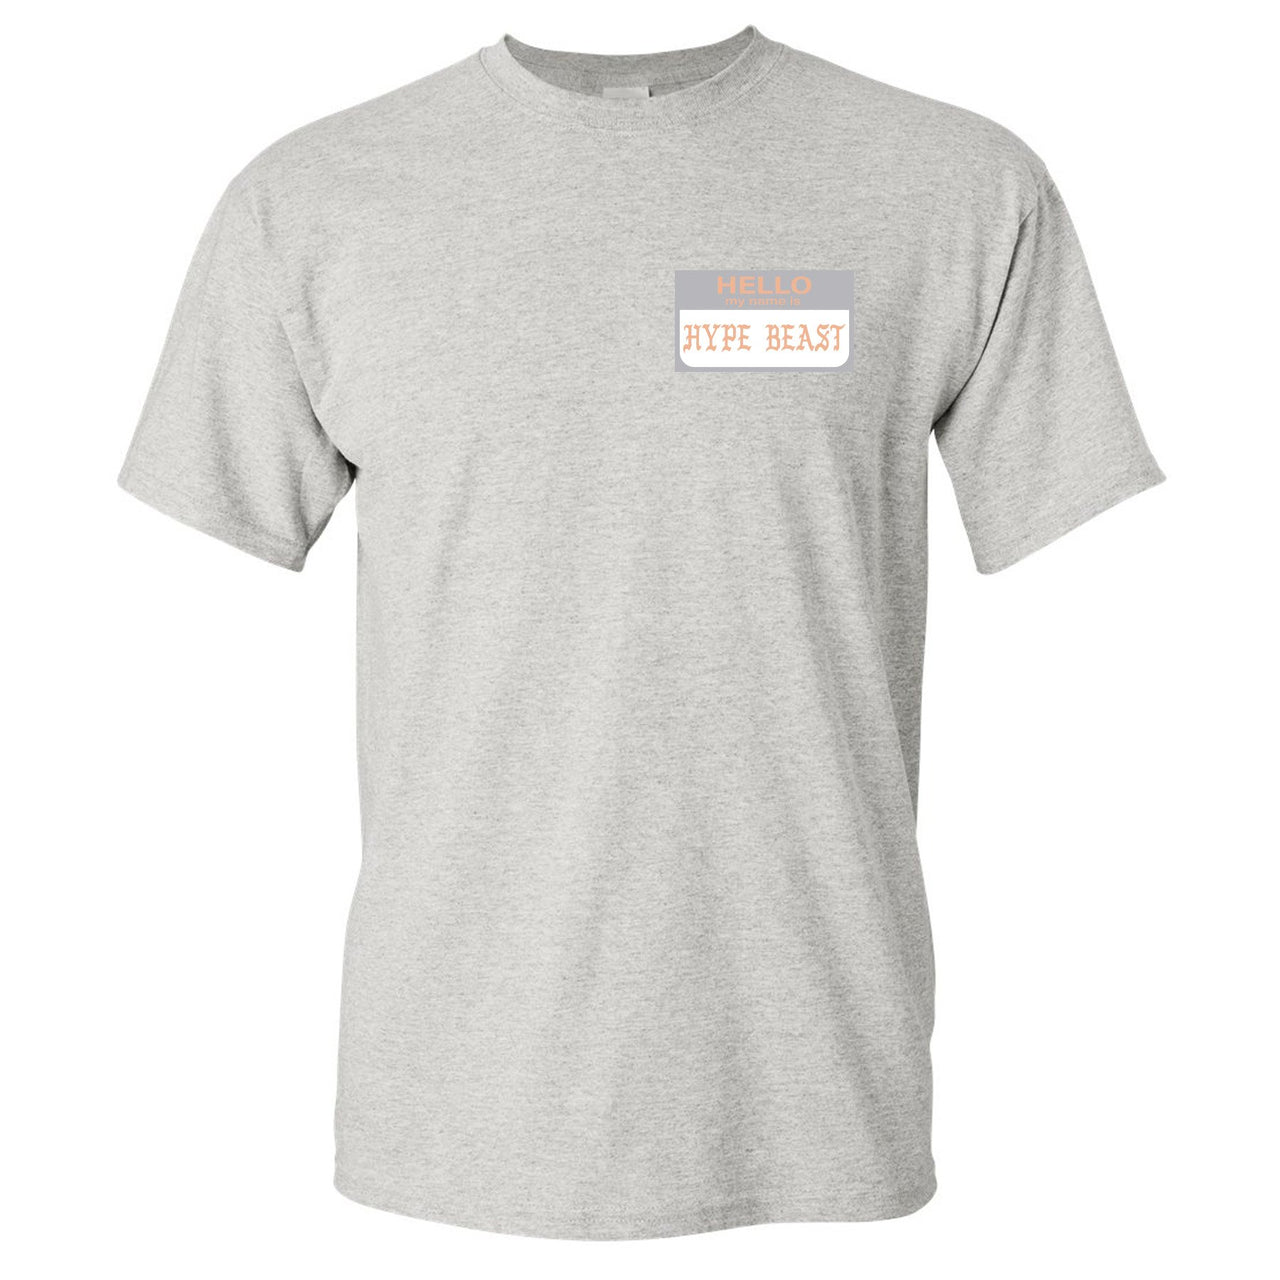 True Form v2 350s T Shirt | Hello My Name Is Hype Beast Pablo, Heathered Sports Gray